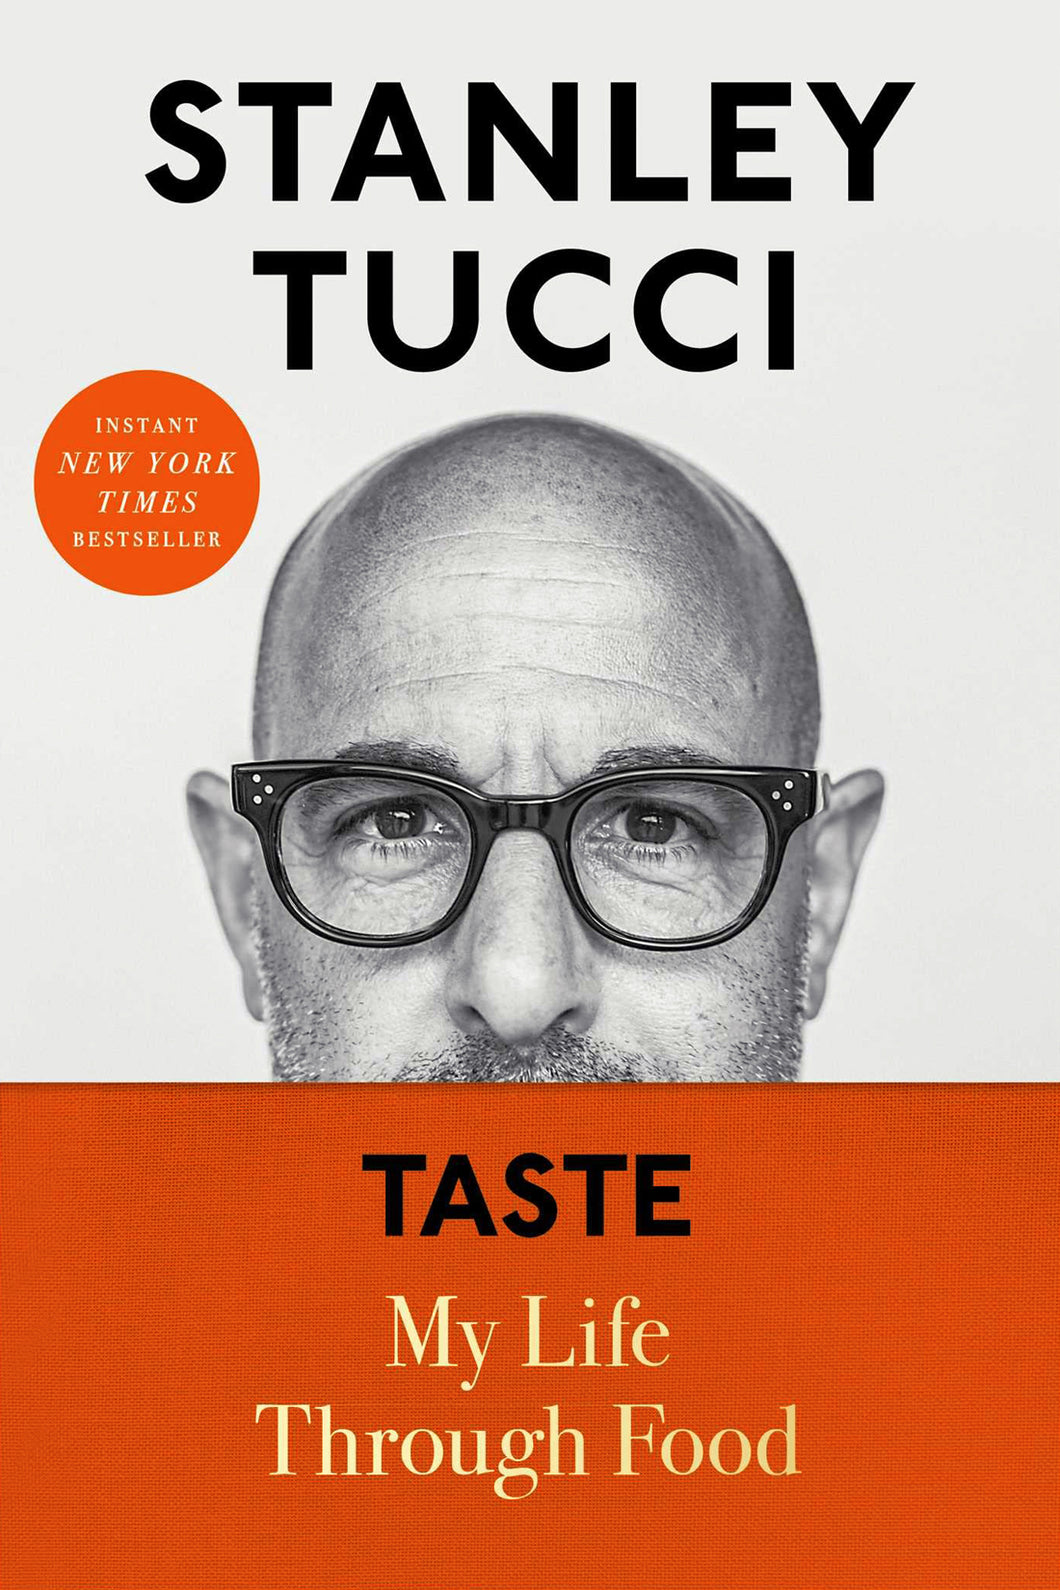 Taste: My Life Through Food by Stanley Tucci / BOOK OR BUNDLE - Starting at $28!